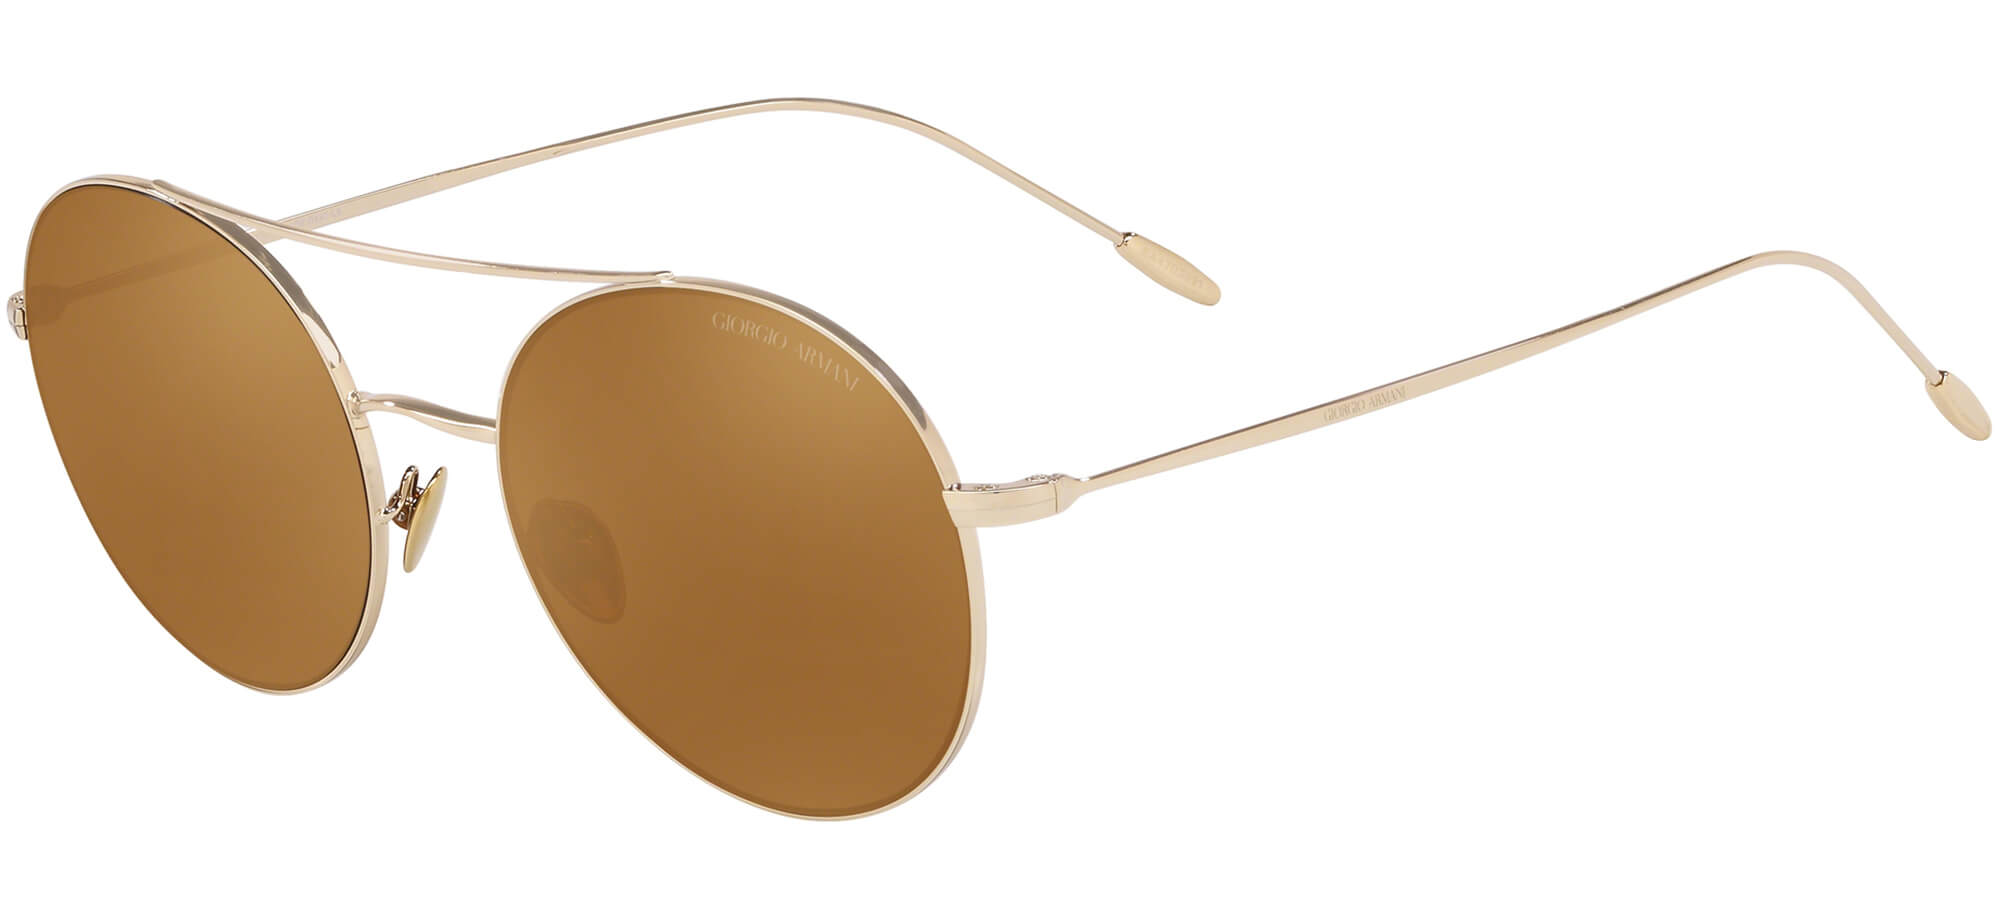 Giorgio ArmaniFRAMES OF LIFE AR 6050Pale Gold/brown Gold (3013/6H)